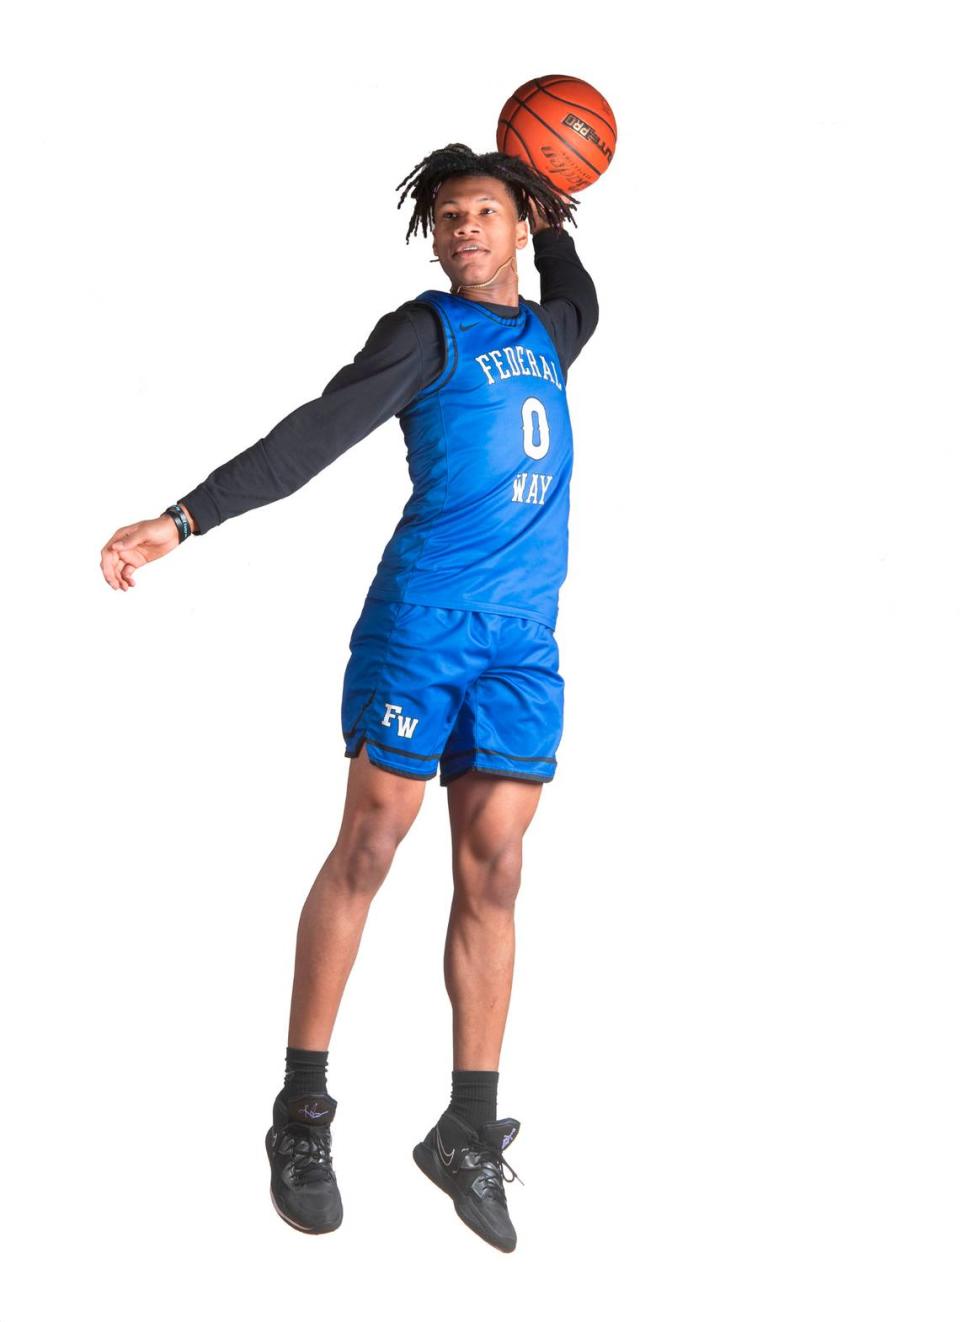 Federal Way senior Vaughn Weems is one of six players named to The News Tribune’s All Area Boys Basketball Team. He is photographed at Curtis High School in University Place, Washington, on Saturday, March 11, 2023.